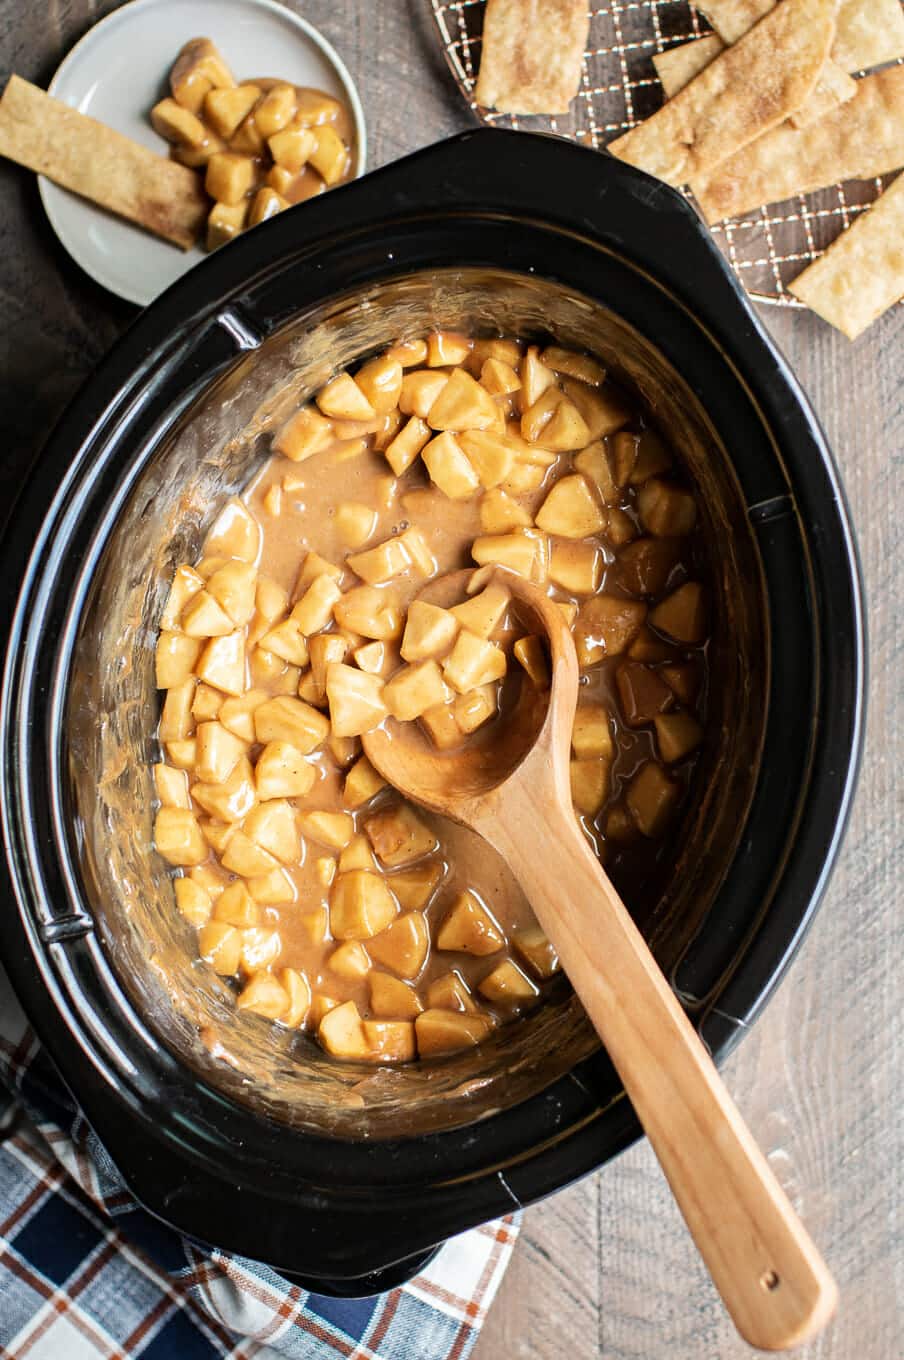 Diced apples in slow cooker with caramel. Pieces of pie strips next to it.